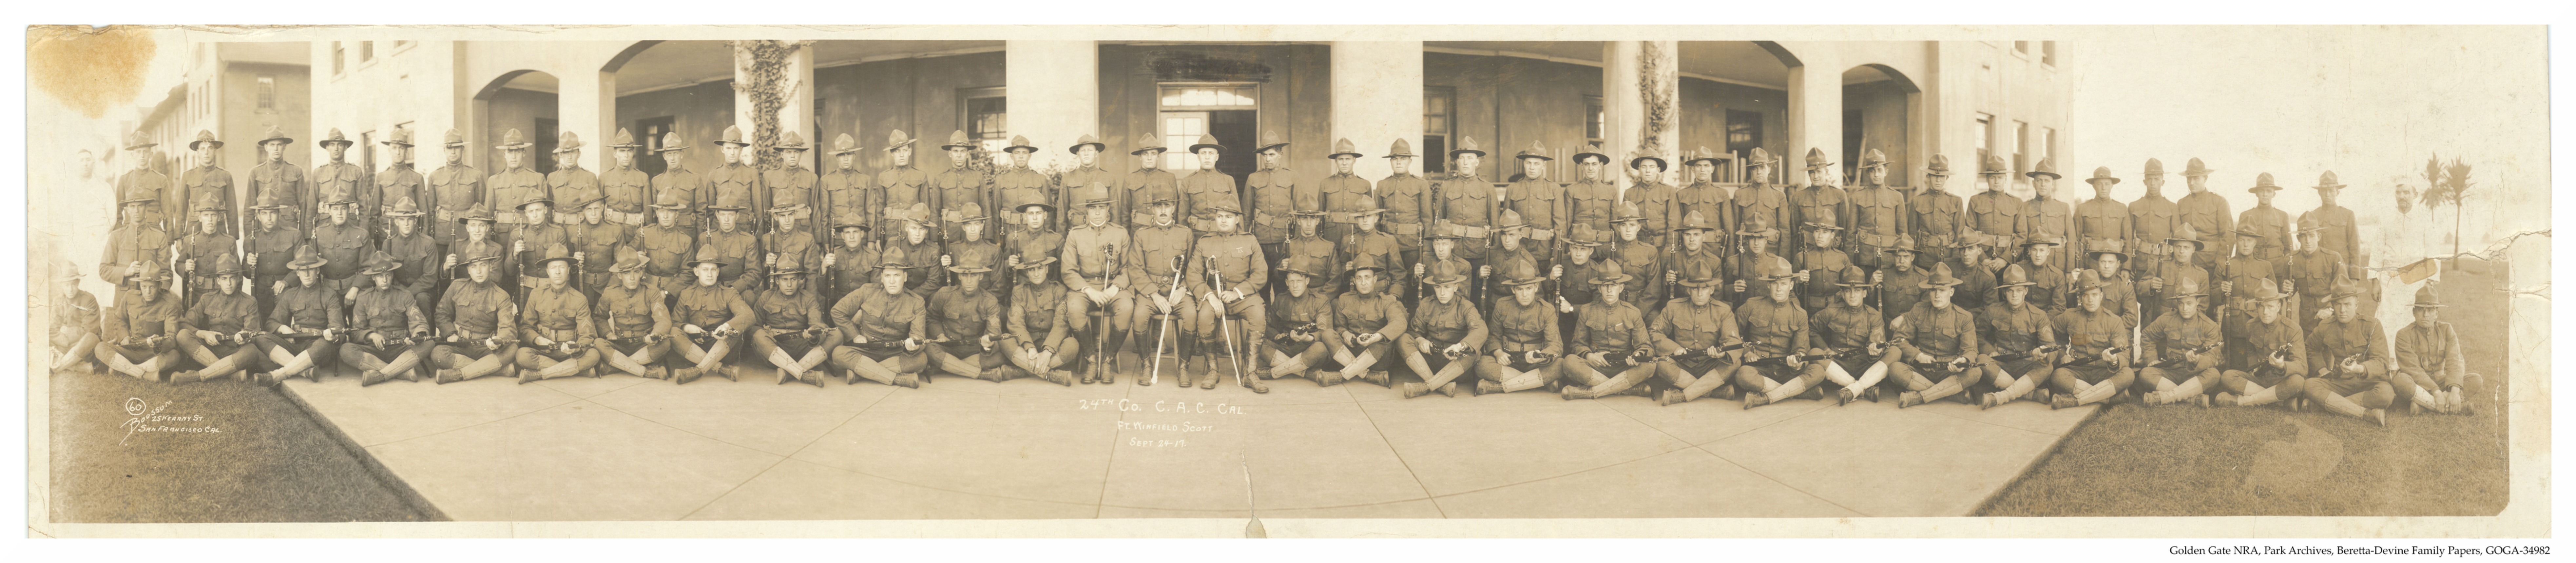 24th company coast artillery corps taken at Fort Winfield Scott in the presidio of San Francisco in 1917